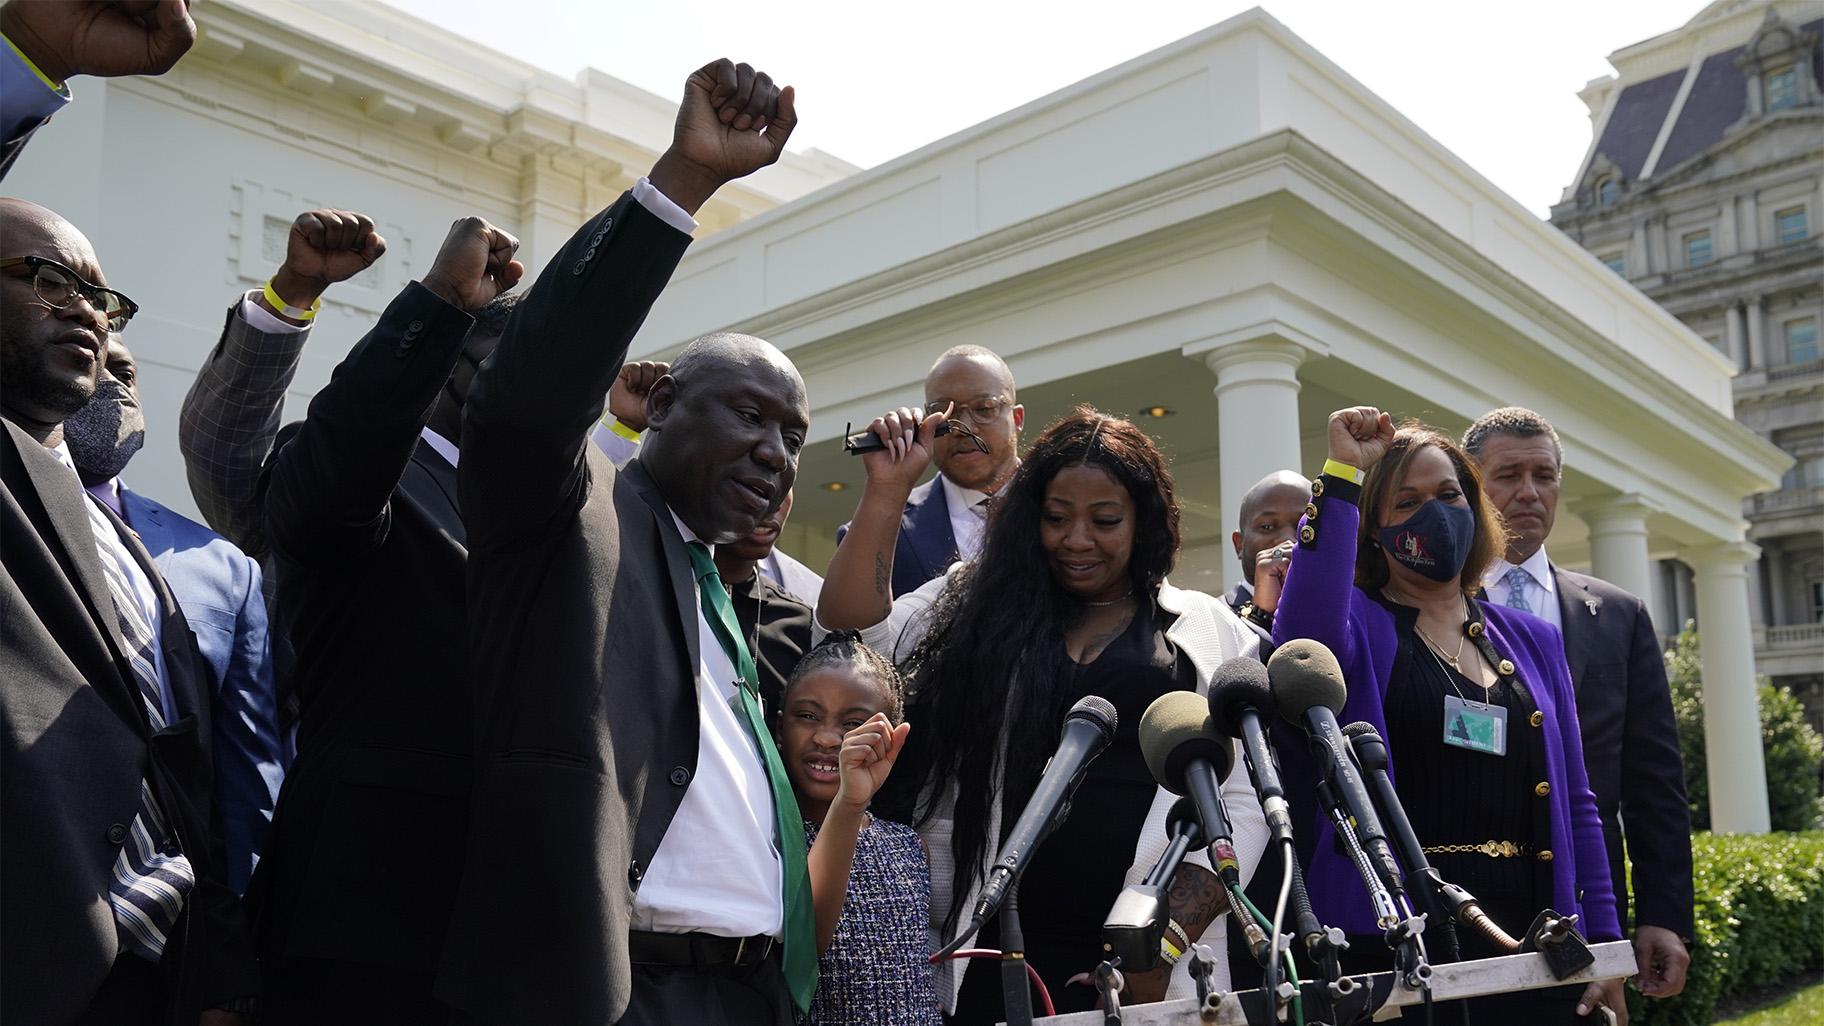 Benjamin Crump, front center, along with Gianna Floyd, daughter of George Floyd, and her mother Roxie Washington, and others talk with reporters after meeting with President Joe Biden at the White House, Tuesday, May 25, 2021, in Washington. (AP Photo / Evan Vucci)